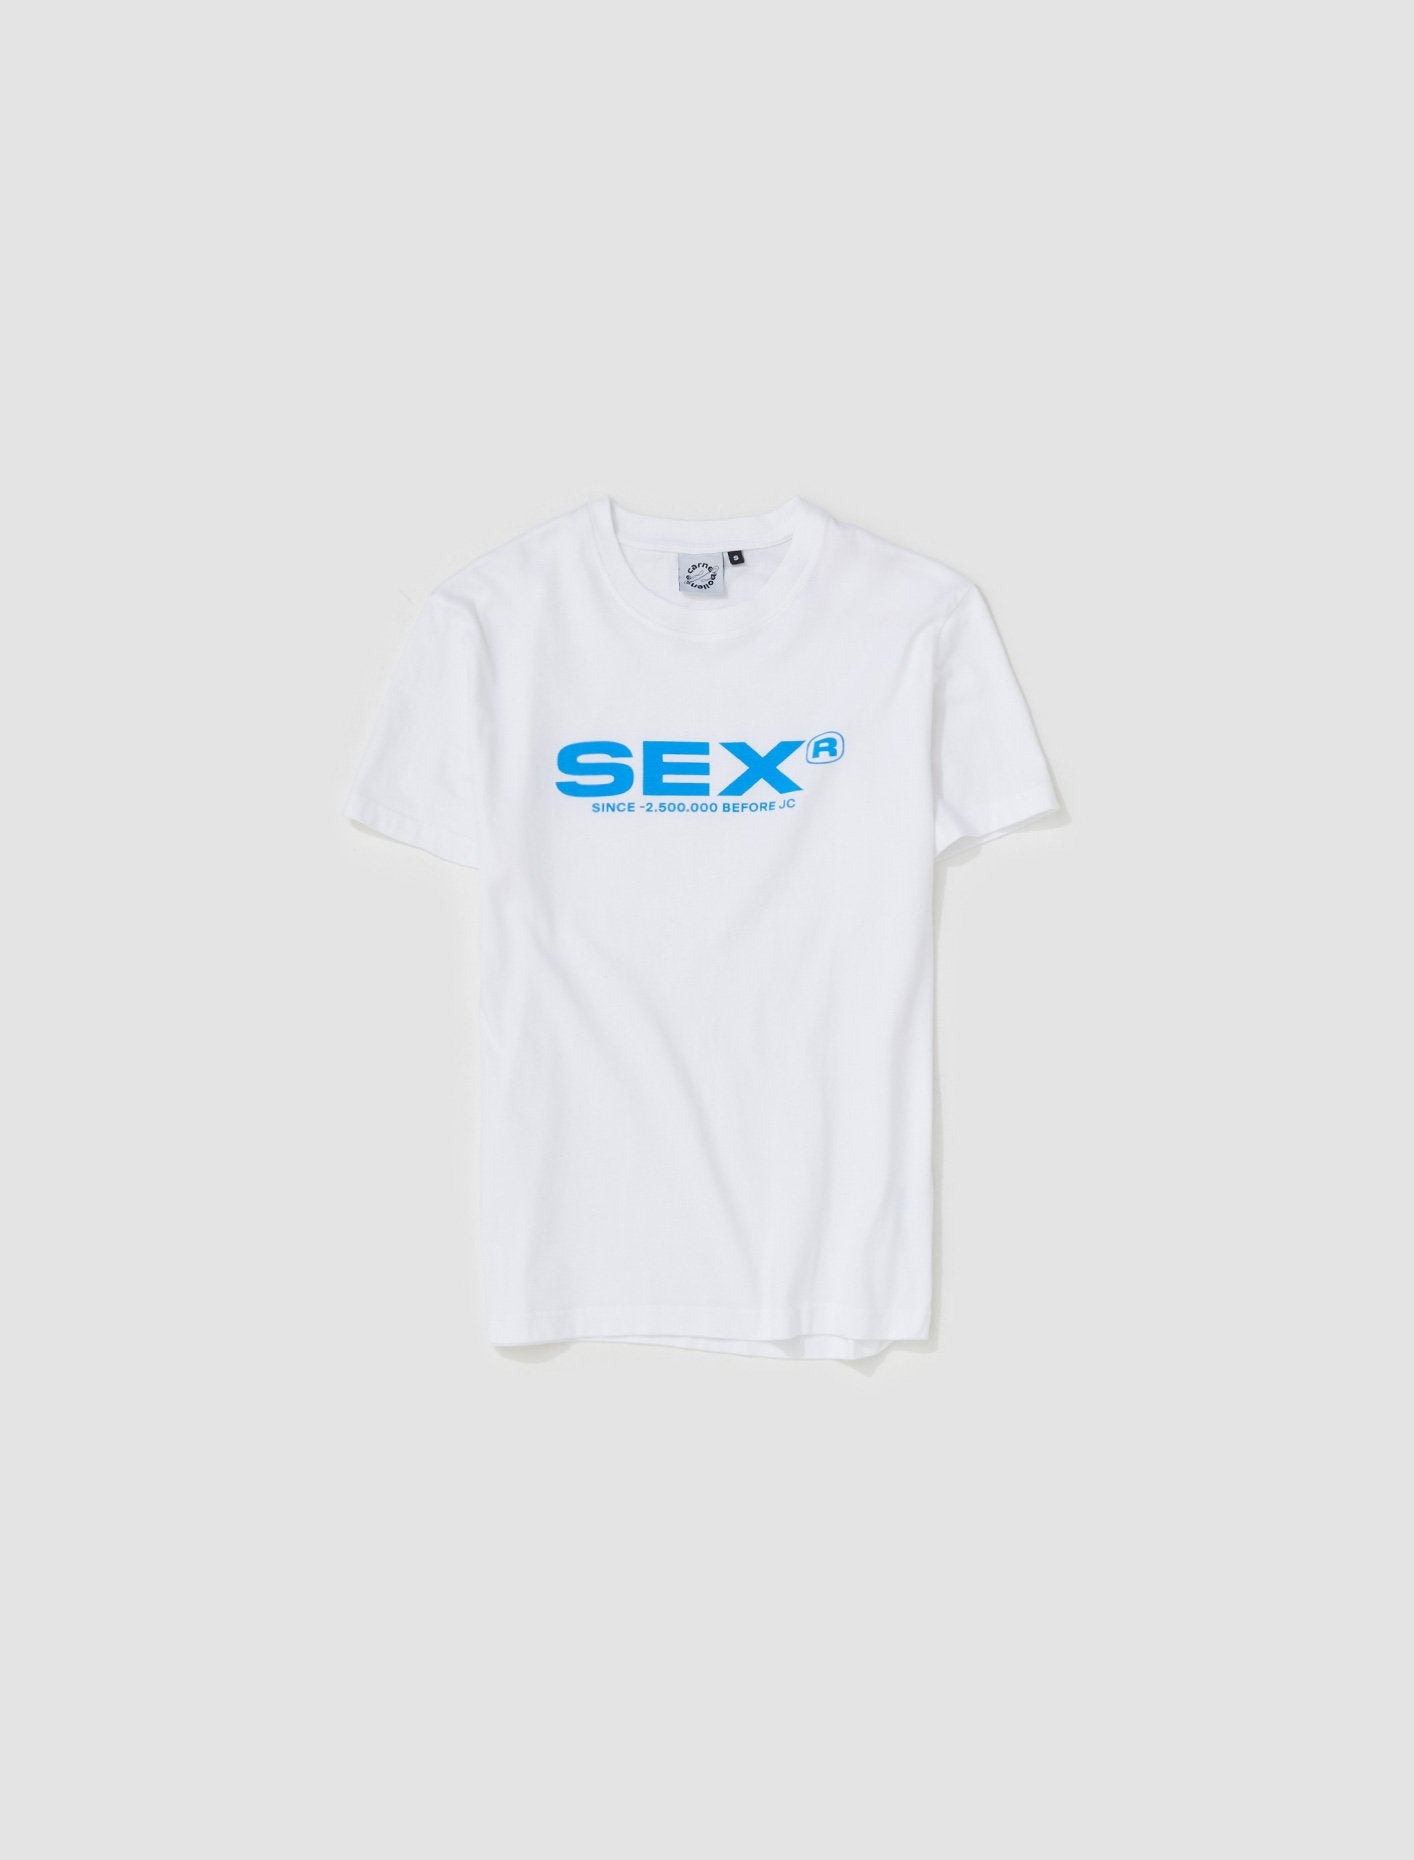 Sex'' T-Shirt in White